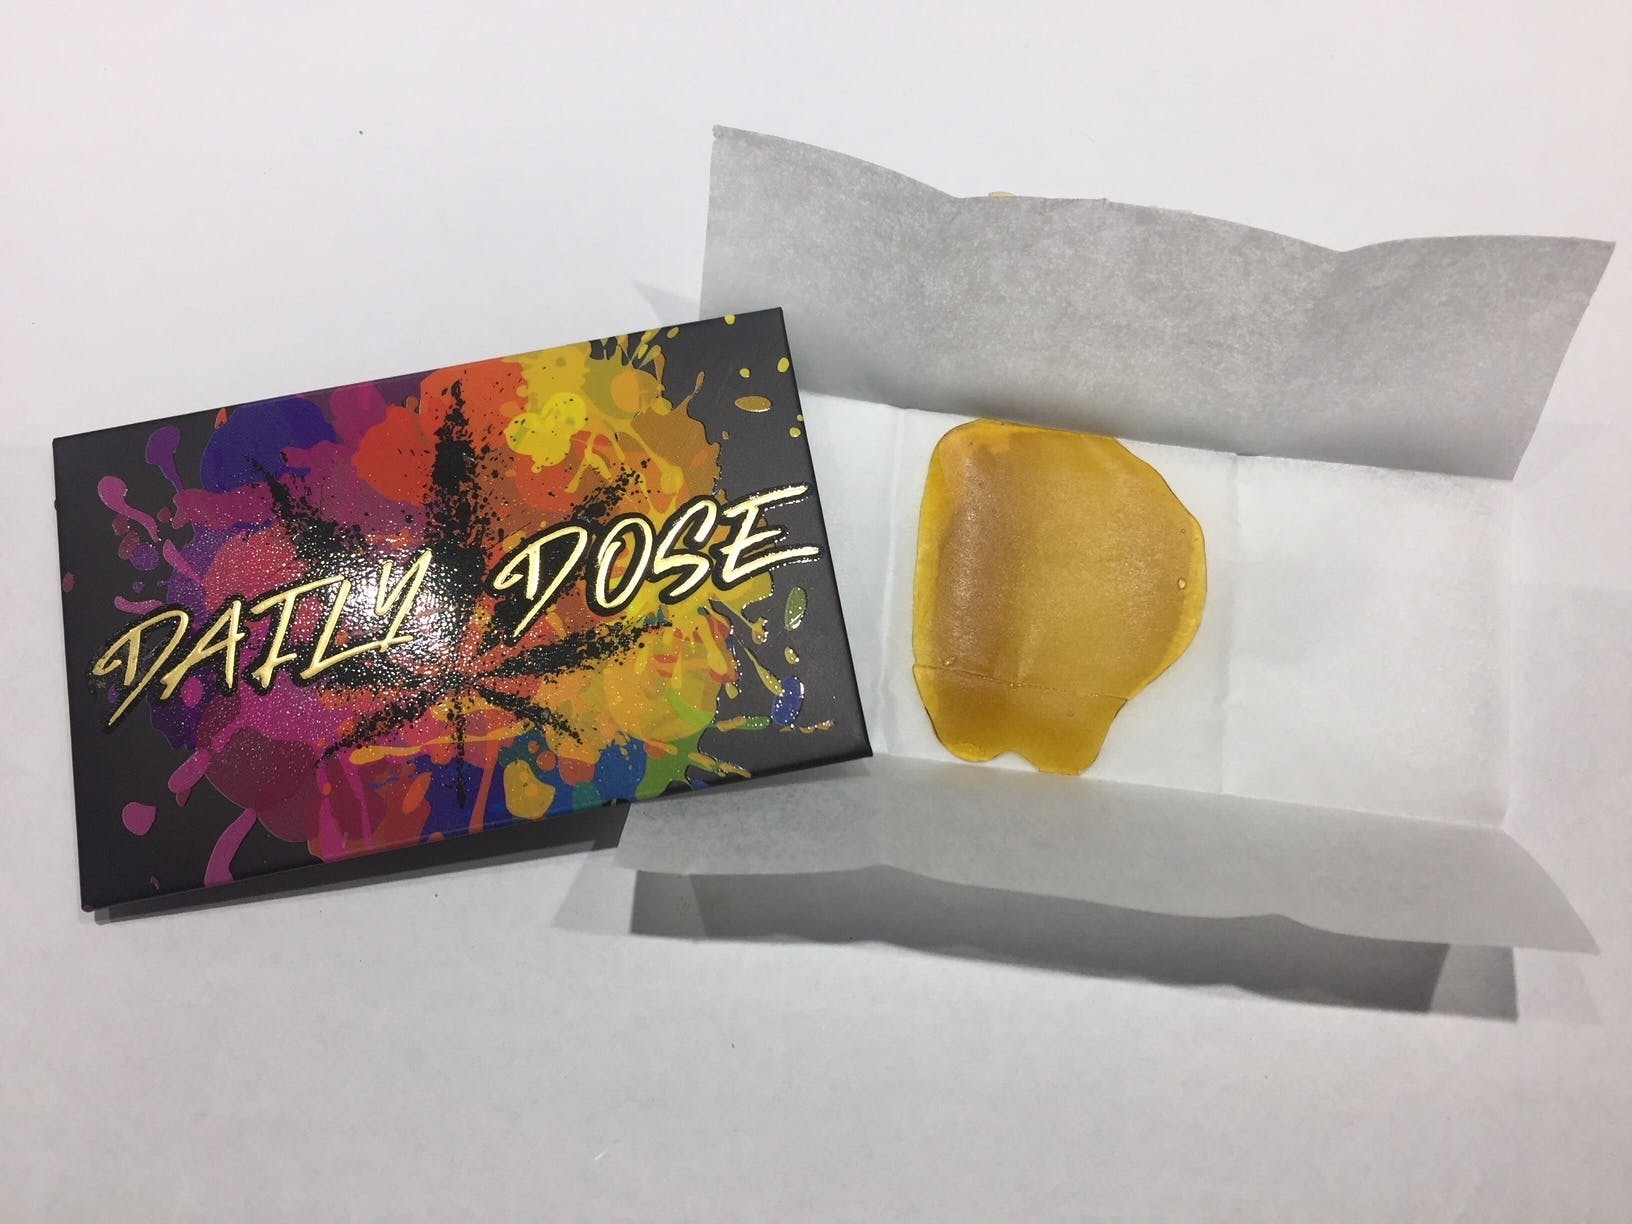 wax-daily-dose-extracts